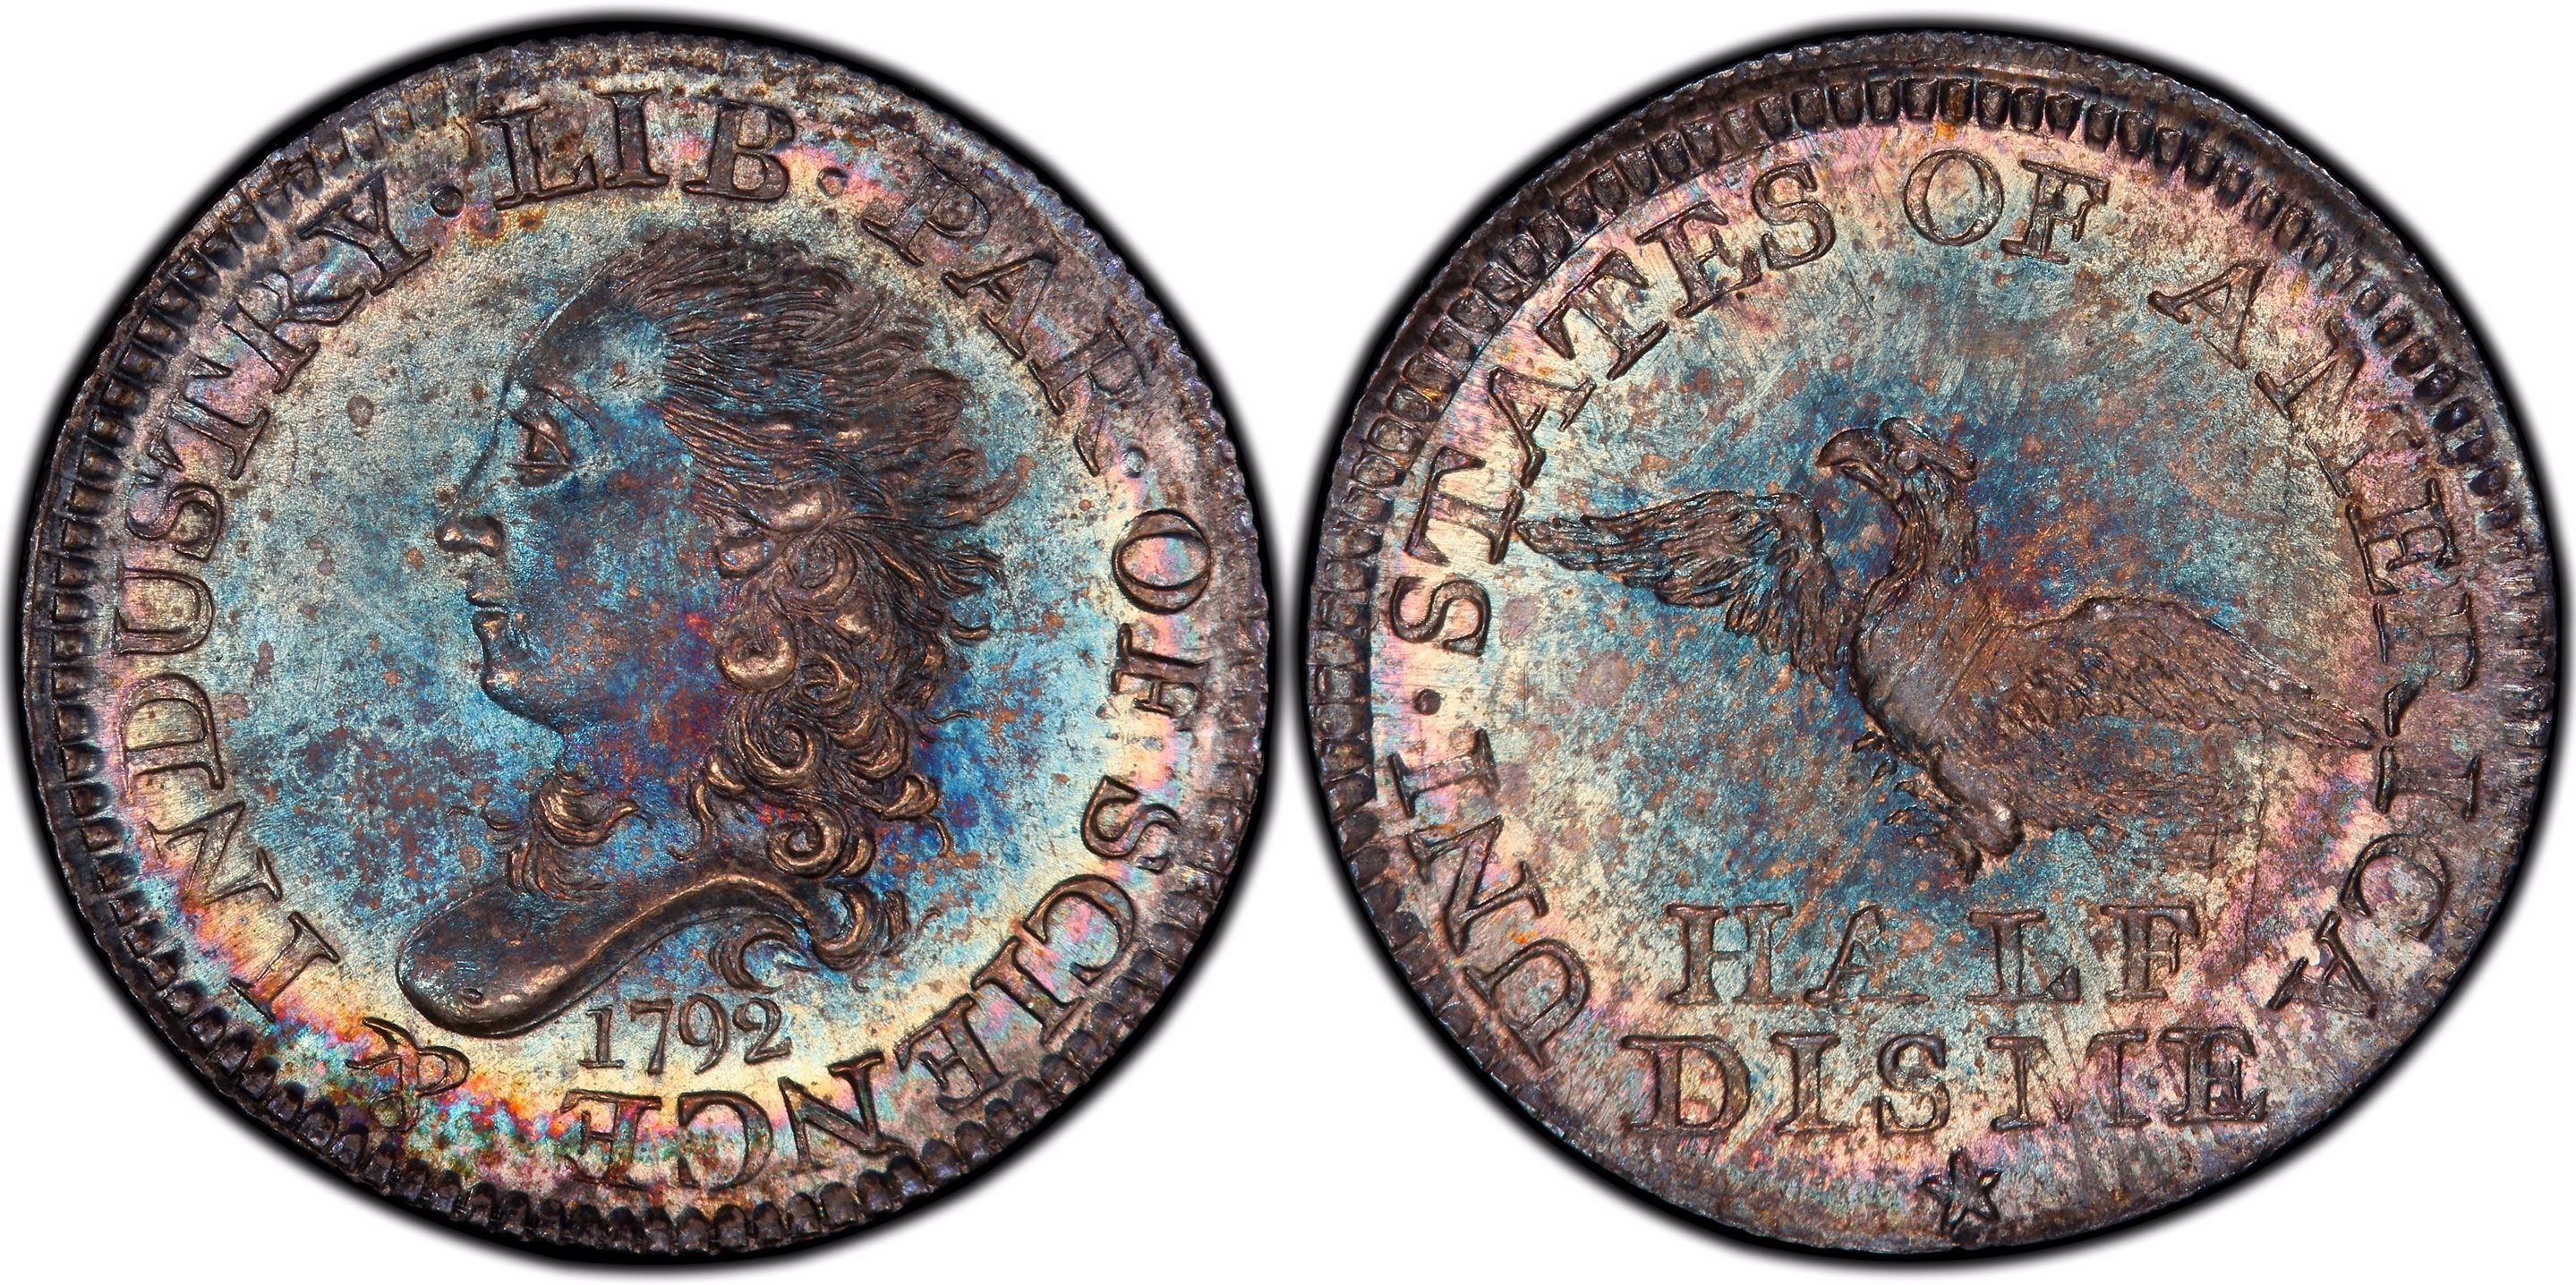 Five rare and valuable coins to collect worth up to $1.5million, from the  Lincoln penny to Washington quarter